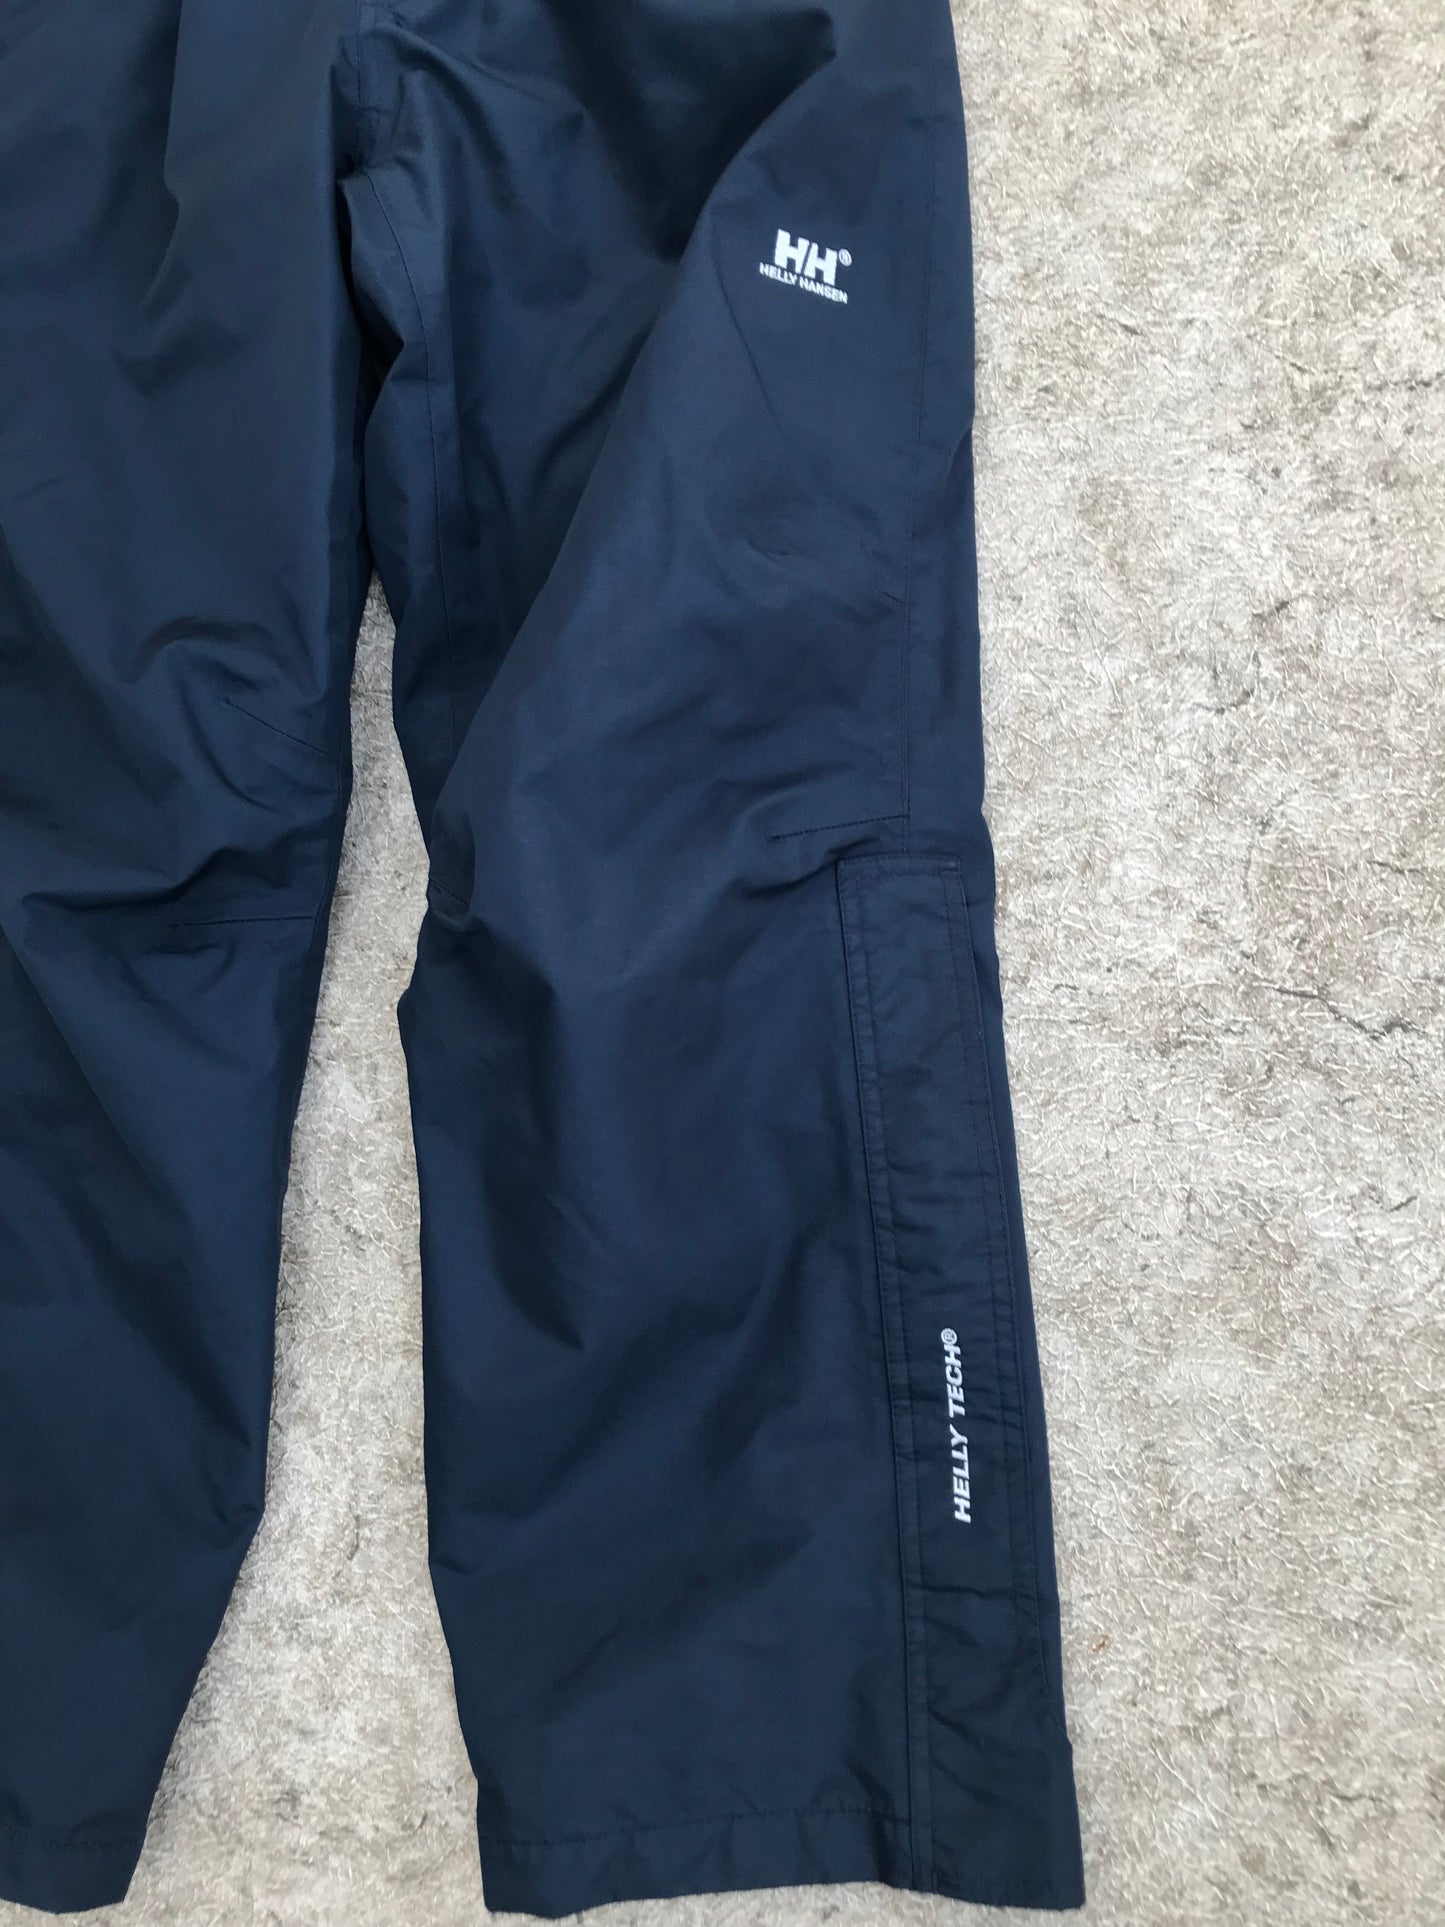 Rain Pants Ladies Size Small Helly Hansen Marine Blue Zippers Part Way Up Both Legs Excellent